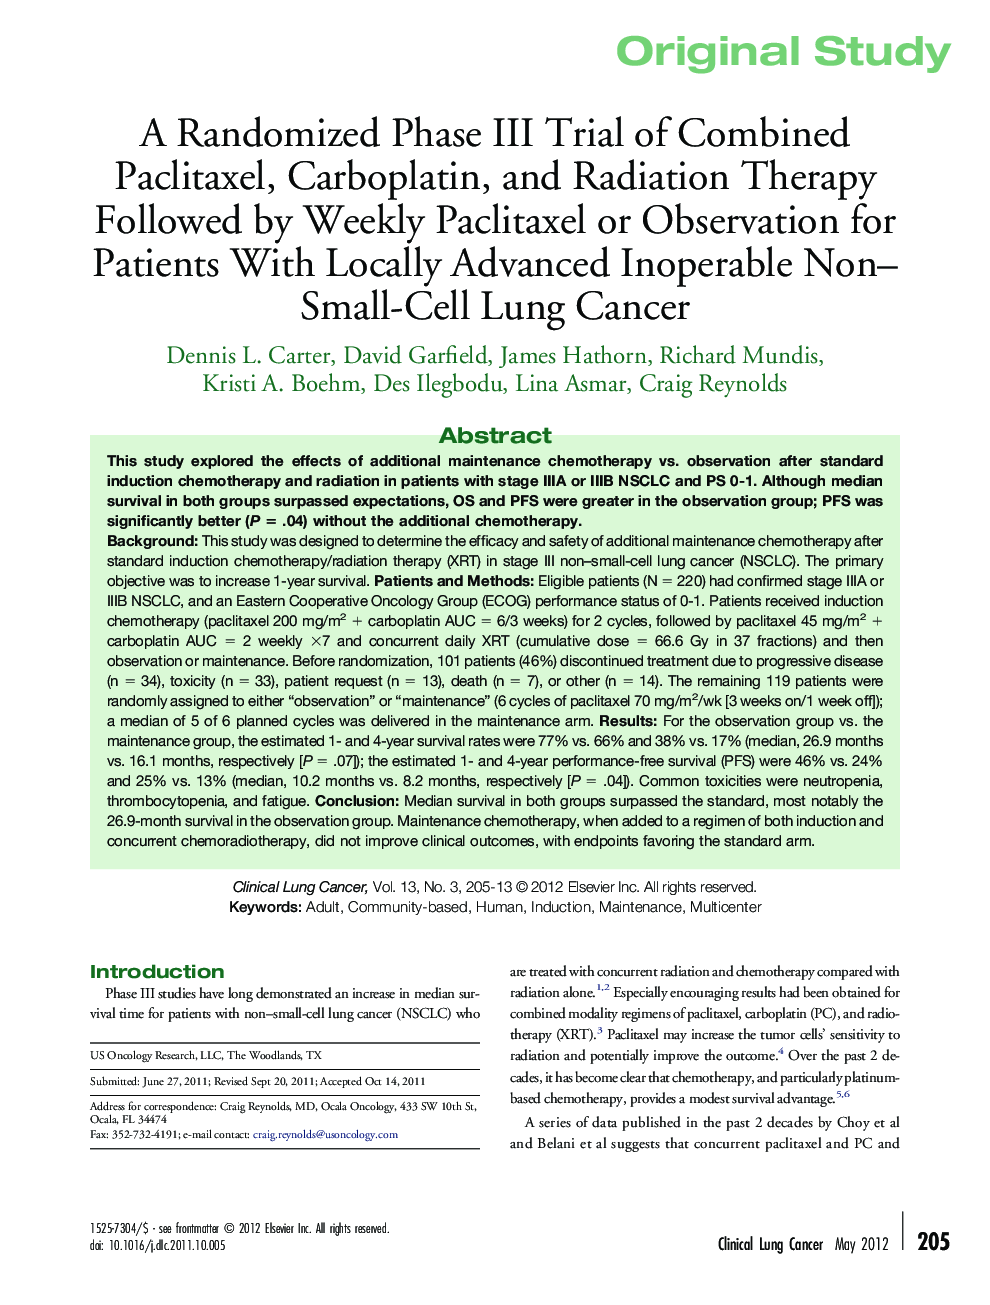 A Randomized Phase III Trial of Combined Paclitaxel, Carboplatin, and Radiation Therapy Followed by Weekly Paclitaxel or Observation for Patients With Locally Advanced Inoperable Non–Small-Cell Lung Cancer